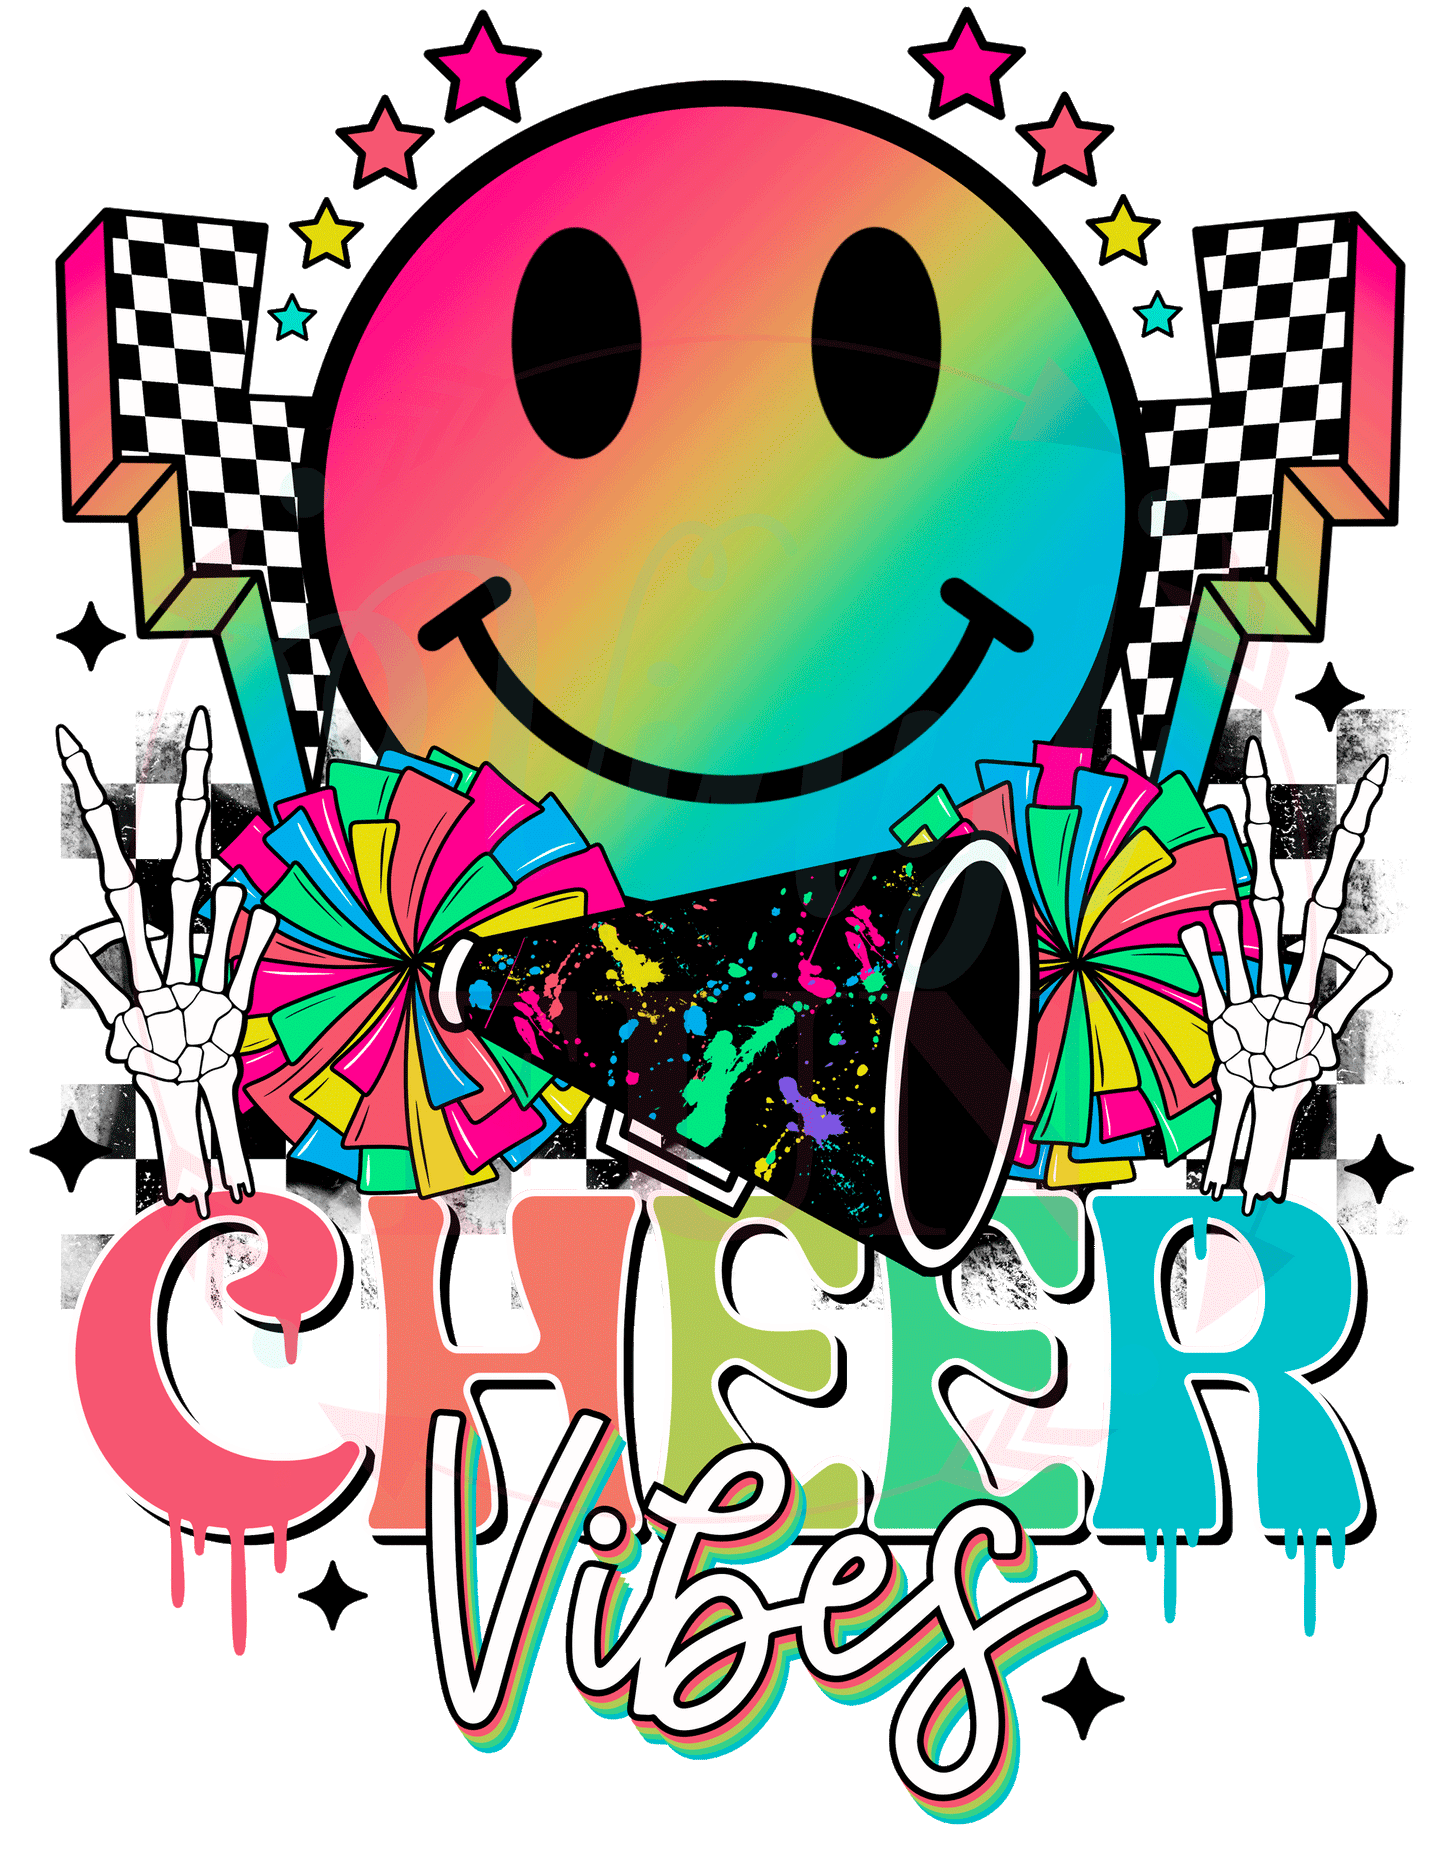 Cheer Vibes Decal -49